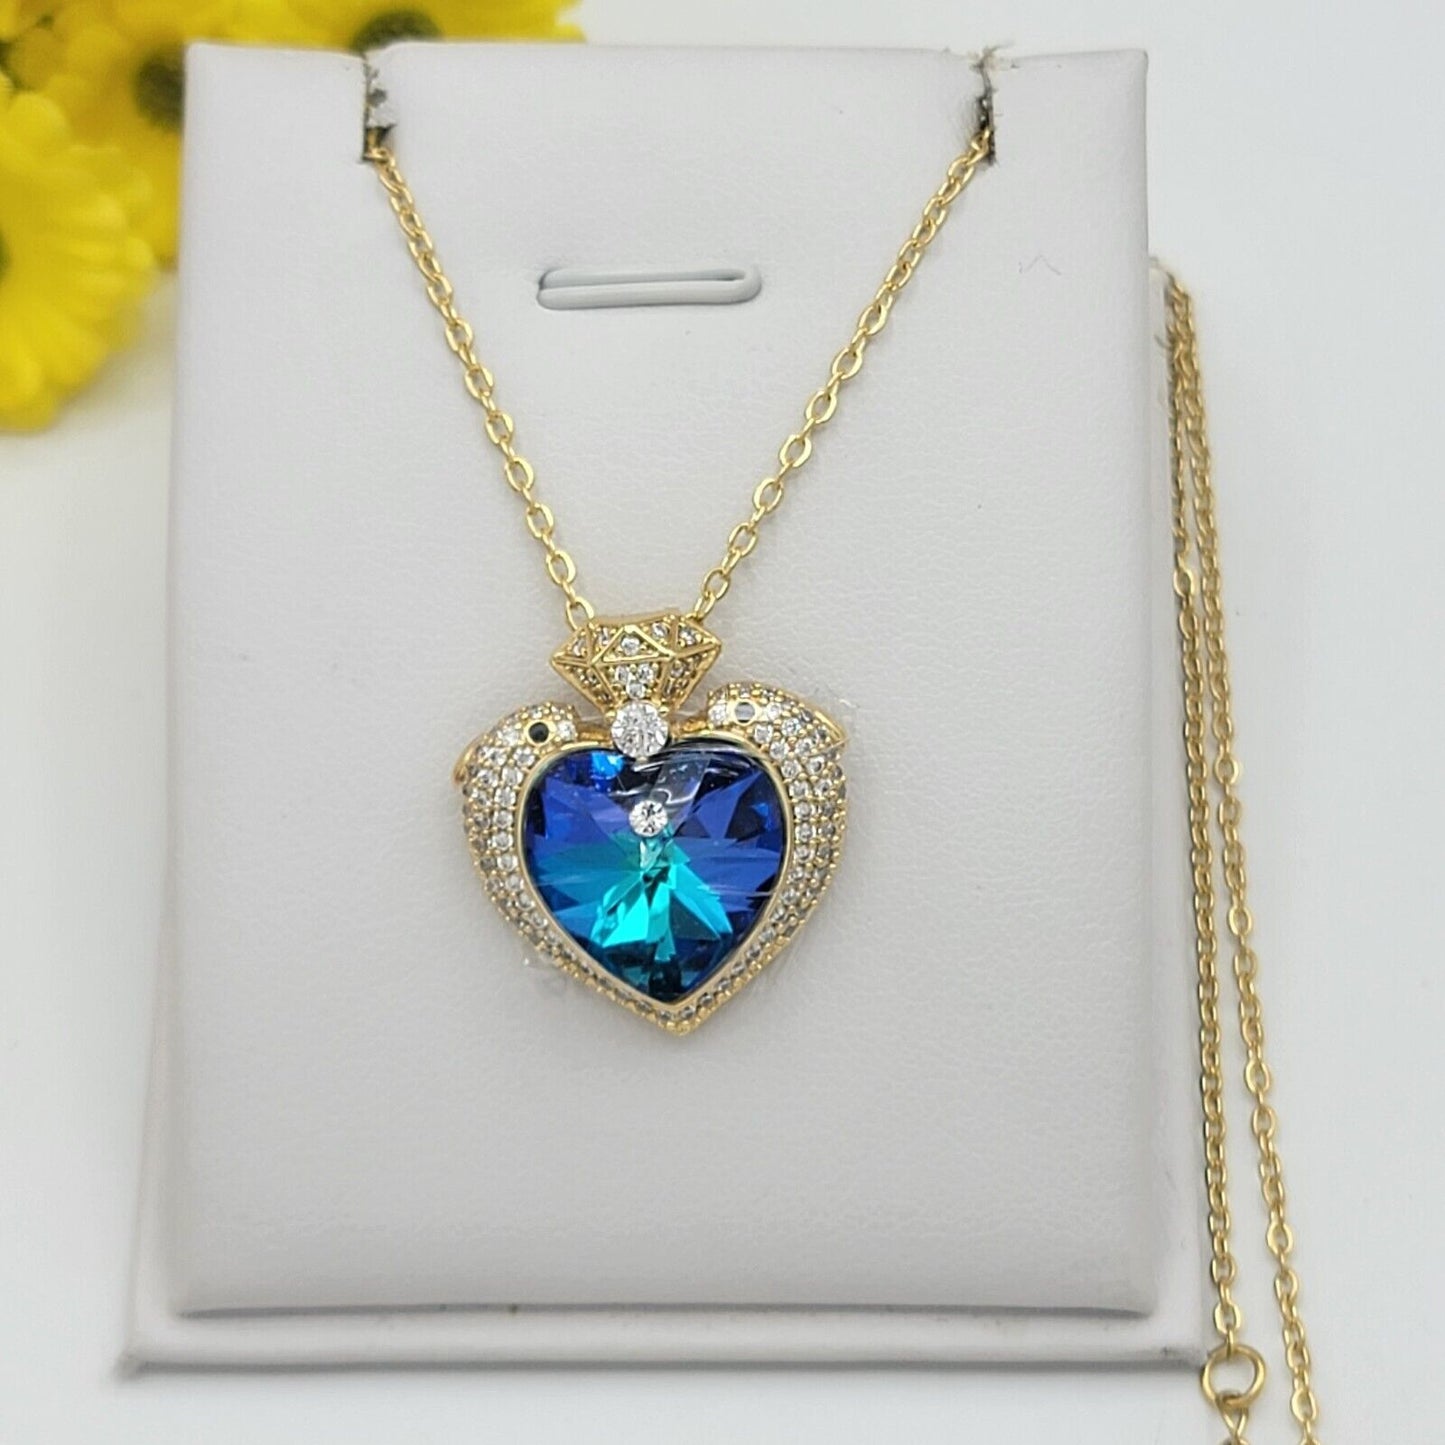 Necklaces - 14K Gold Plated. Blue Crystal Dolphins Heart Pendant & Chain.